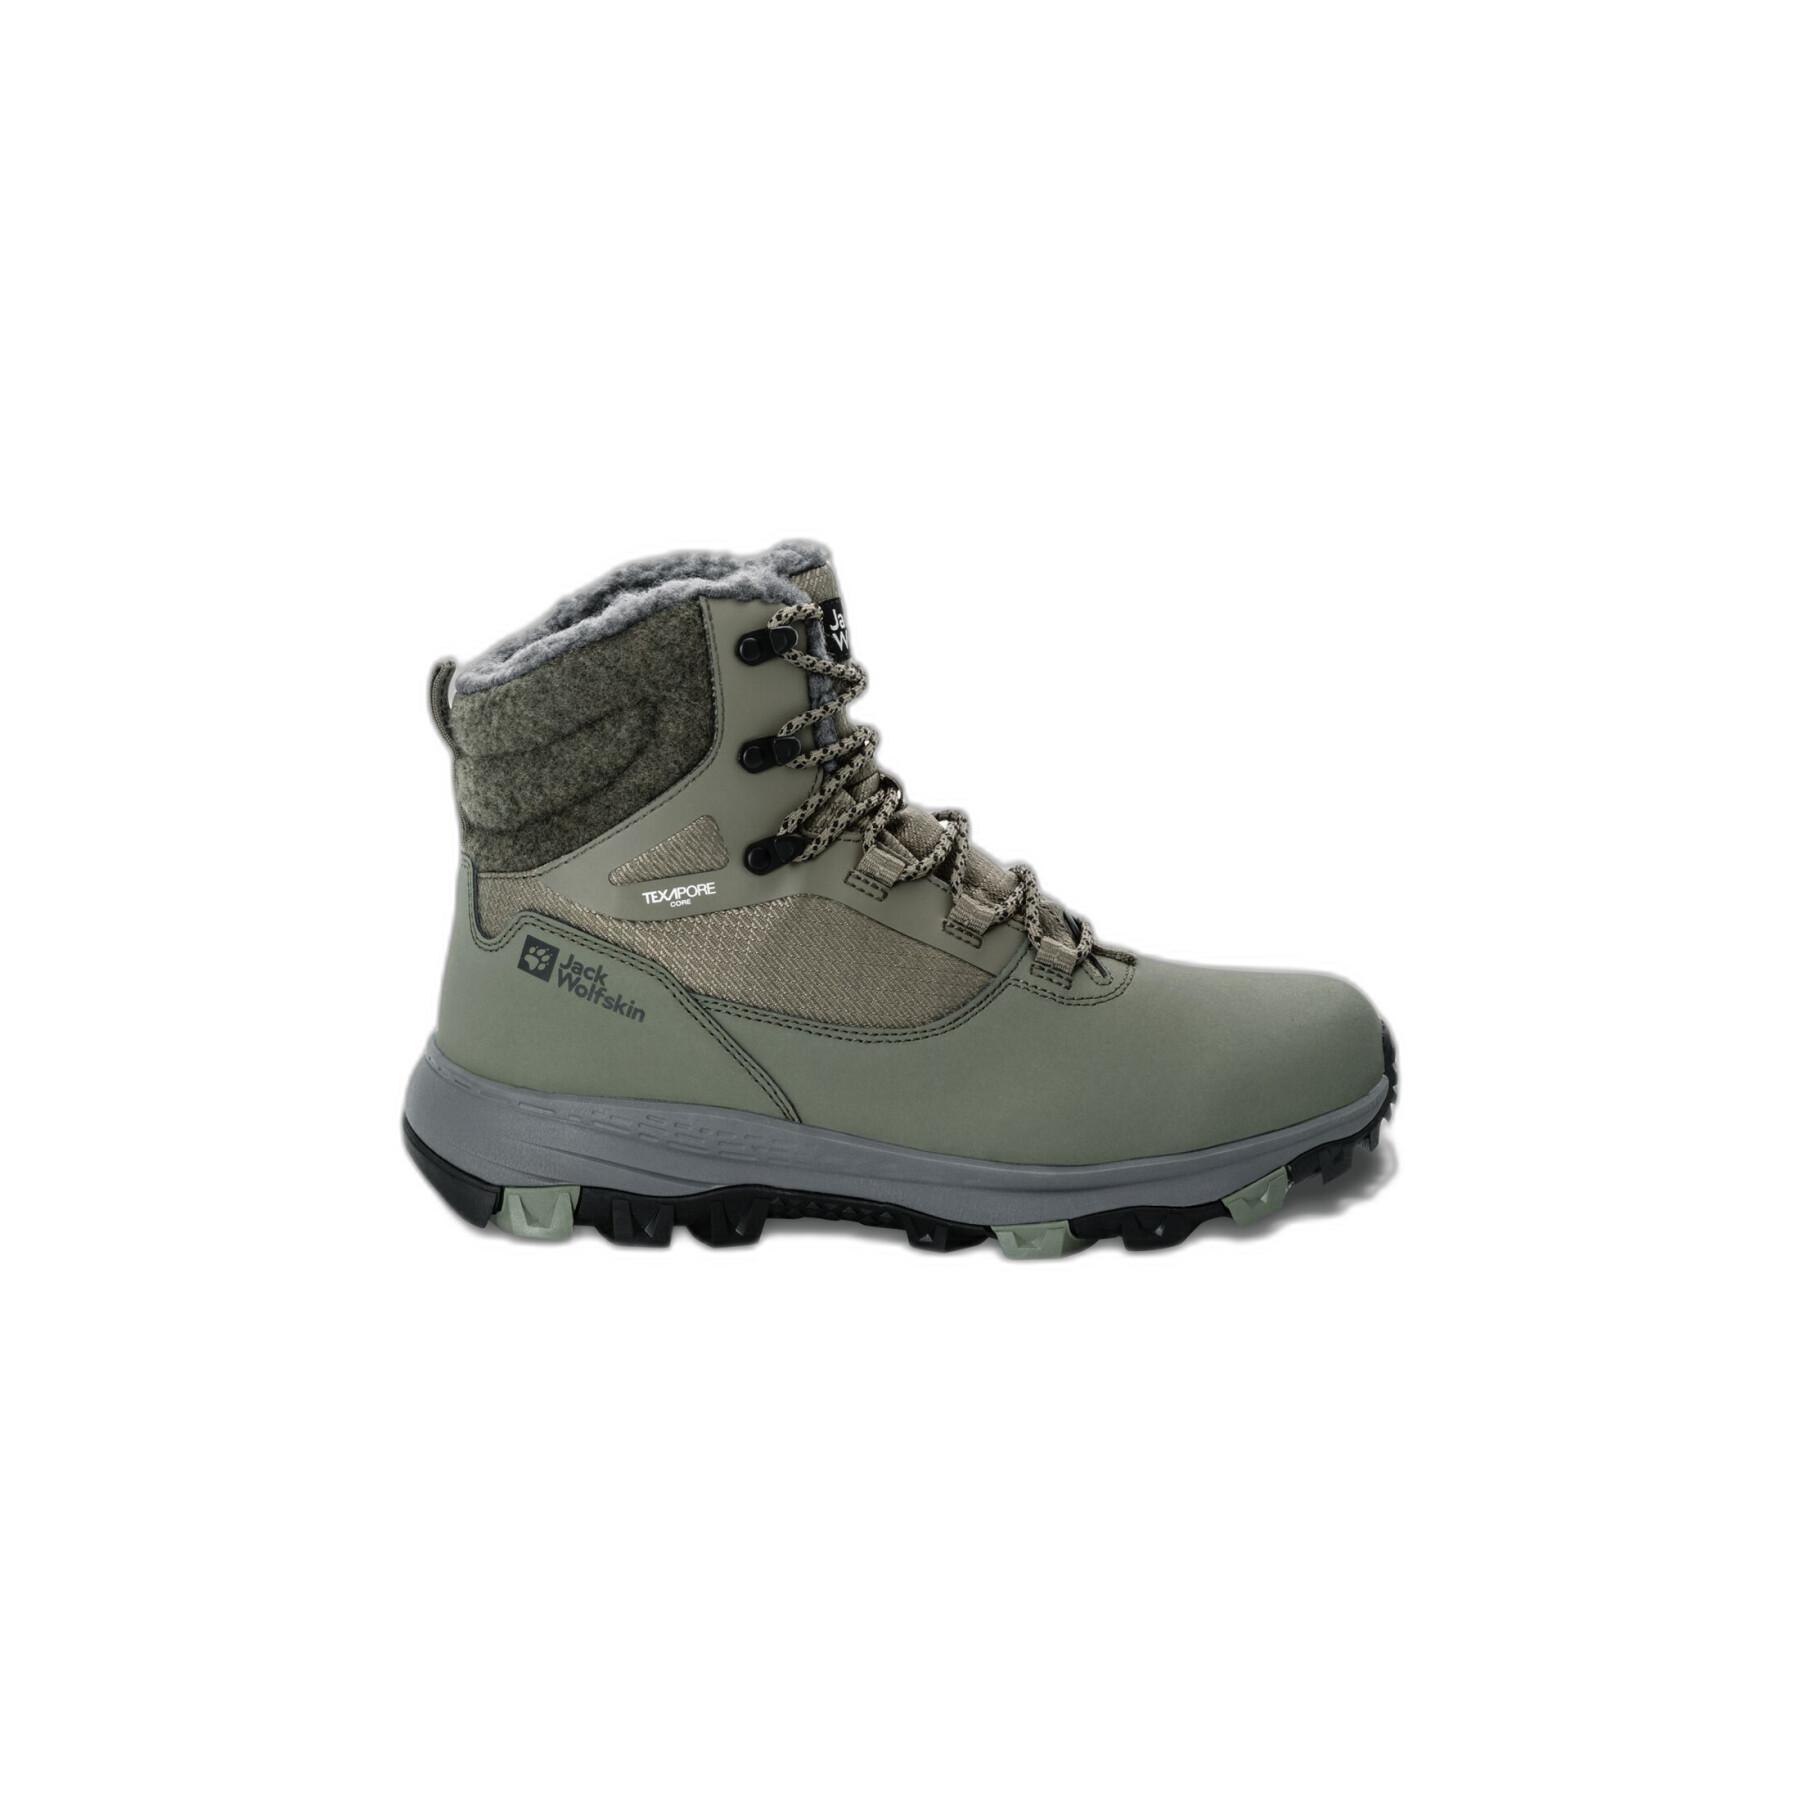 Trail shoes Jack Wolfskin Everquest Texapore High